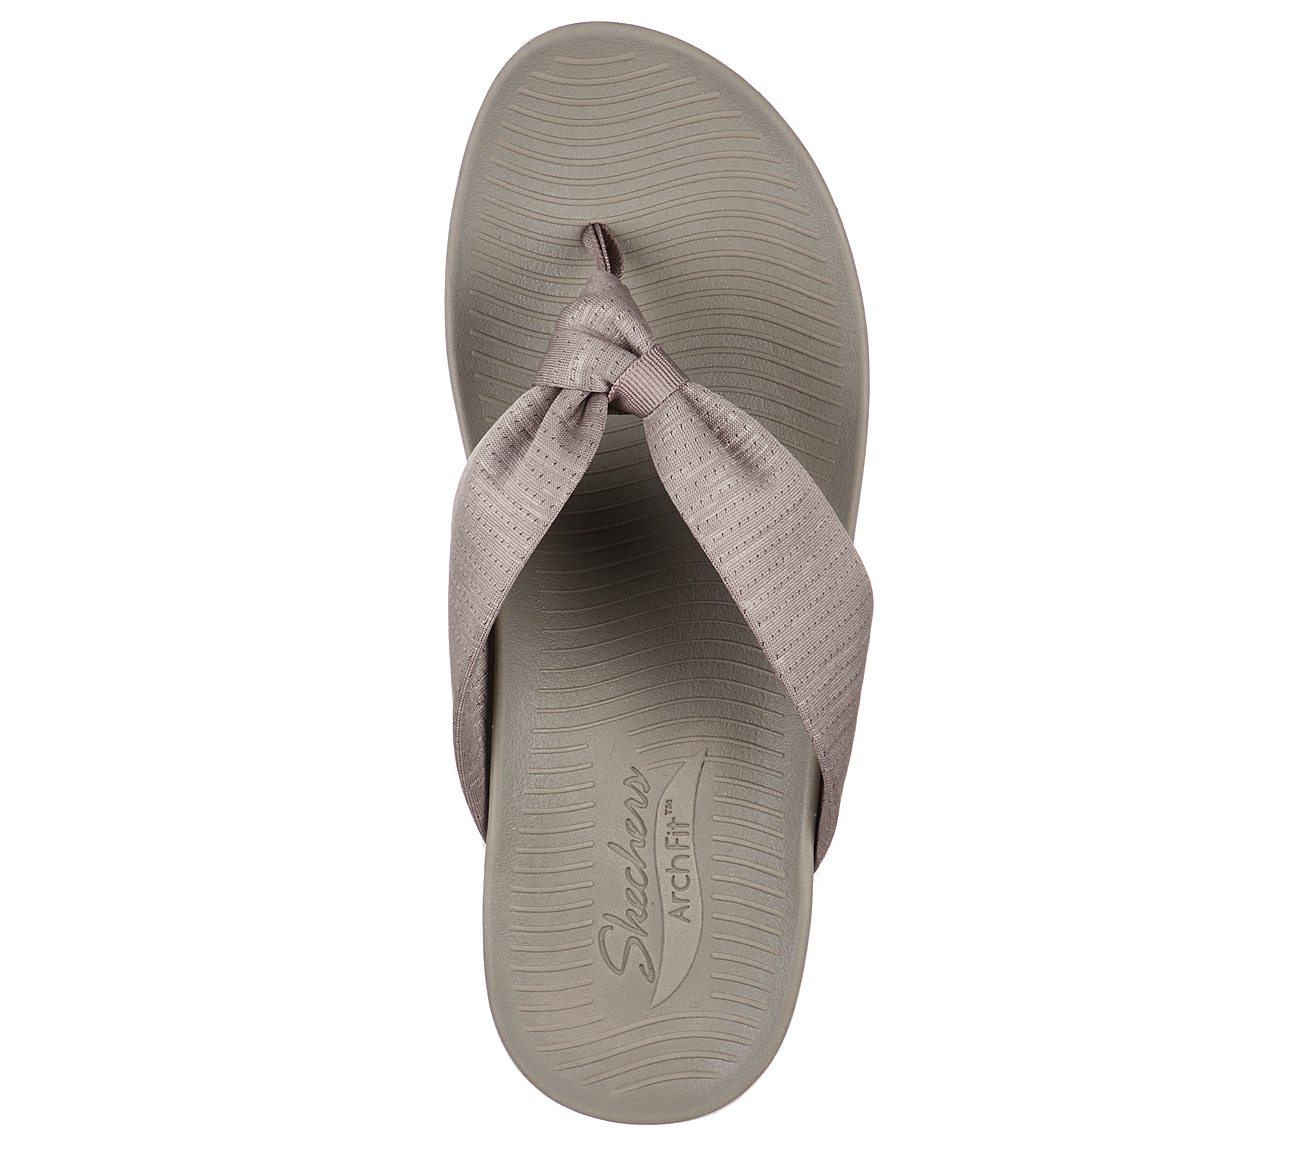 ARCH FIT SUNSHINE - MY LIFE, DARK TAUPE Footwear Top View